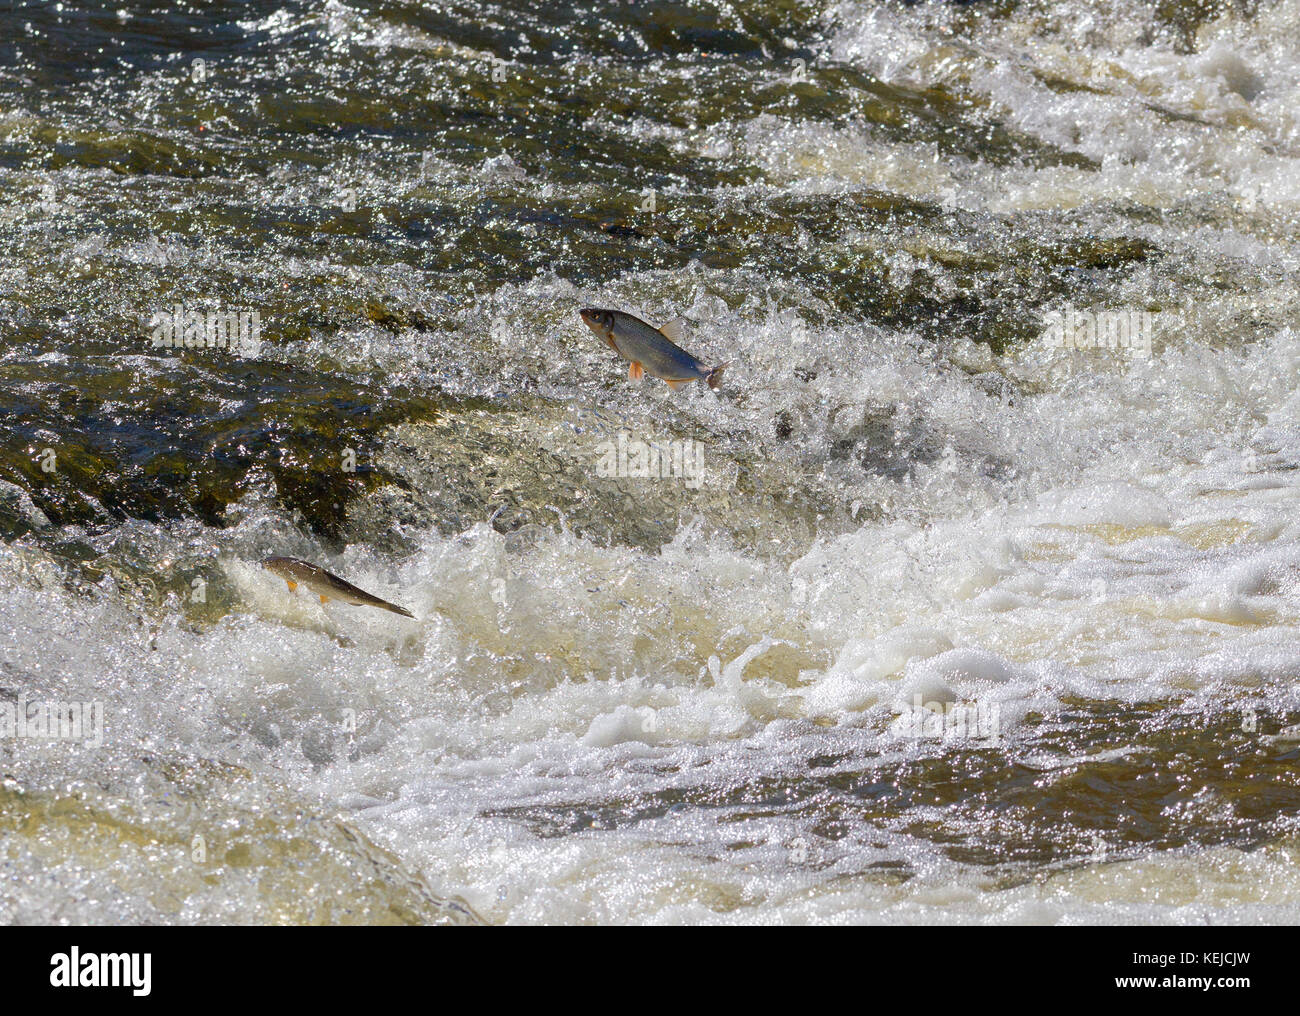 Fish jumping up in waterfall and going upstream for spawning. Stock Photo